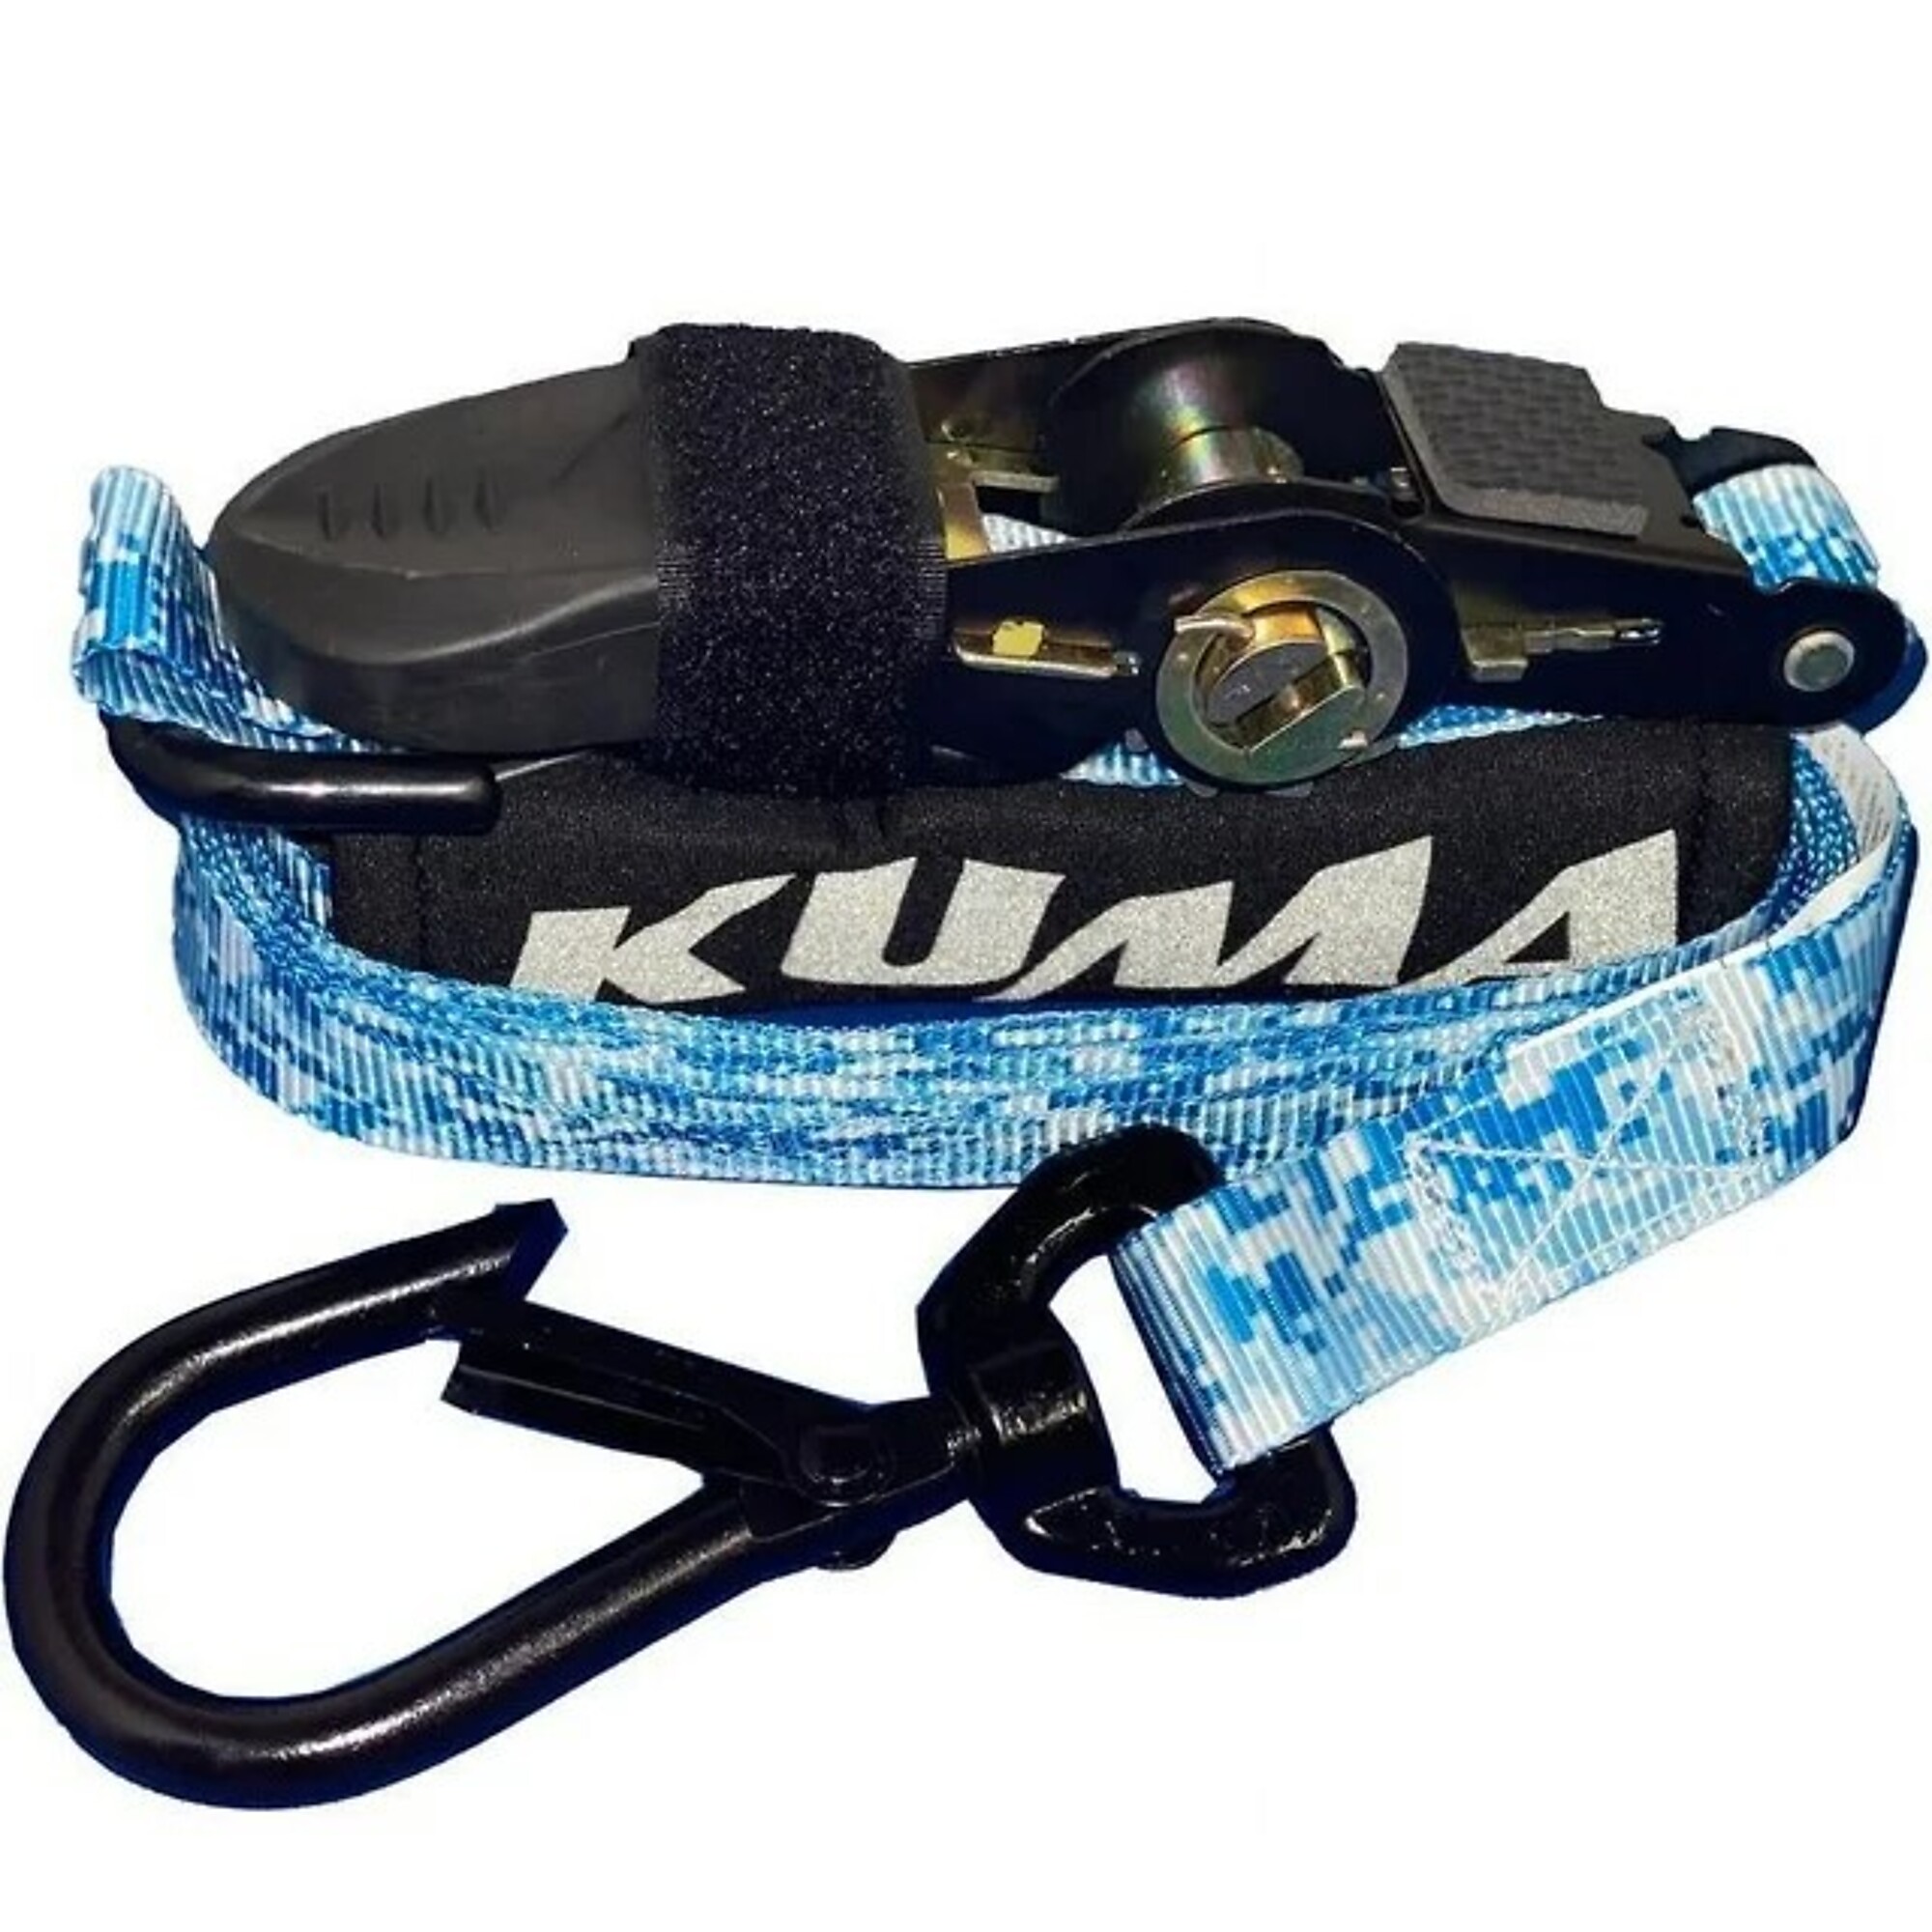 Kuma, 1Inch x 12ft.RatchTie Down 2pk - 1500 Brk Strength, Working Load 500 lb, Straps (qty.) 2 Breaking Strength 1500 lb, Model S2112DB-A